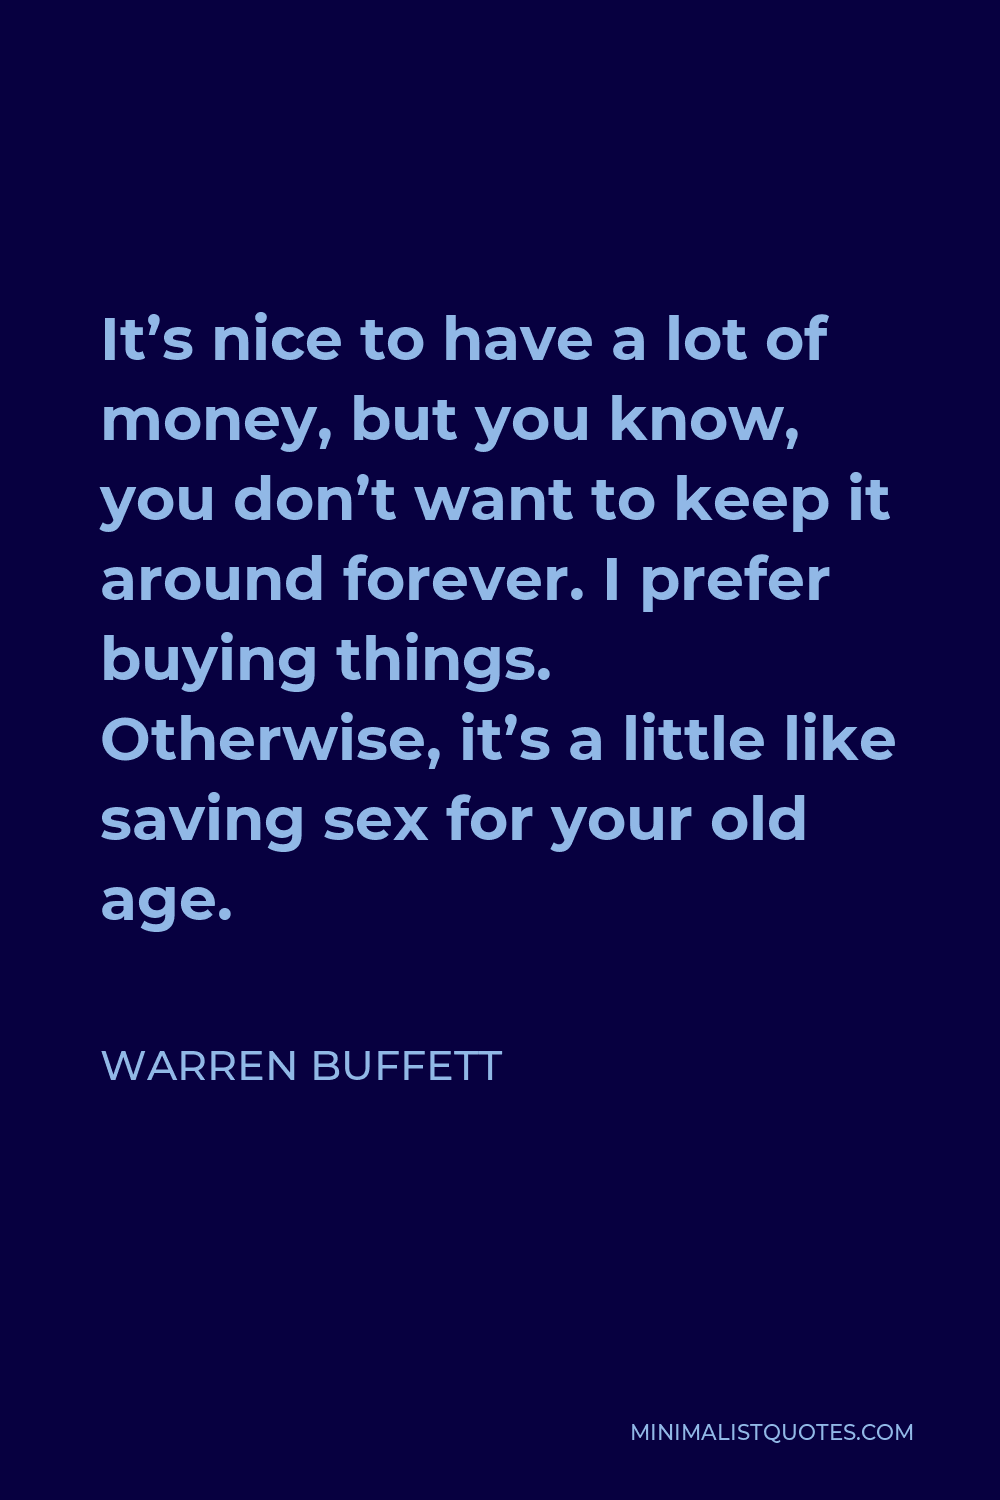 Warren Buffett Quote - It’s nice to have a lot of money, but you know, you don’t want to keep it around forever. I prefer buying things. Otherwise, it’s a little like saving sex for your old age.